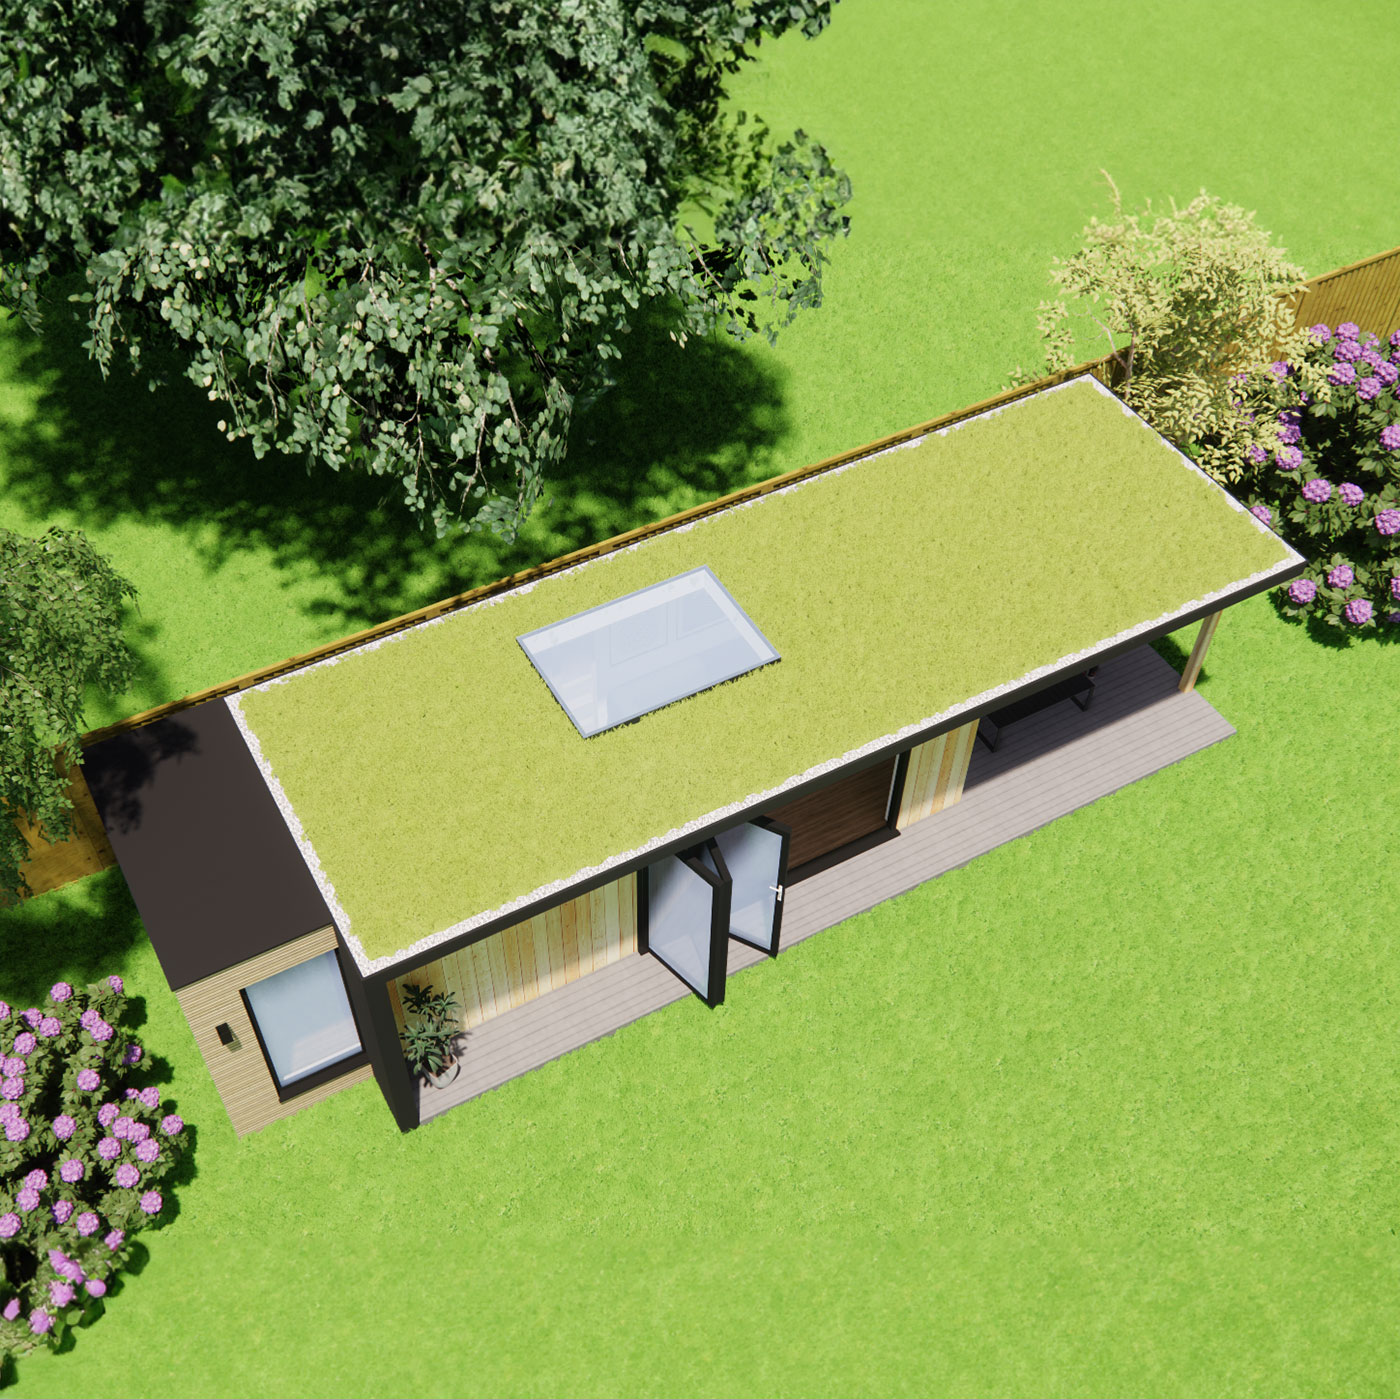 Garden room design with green roof and skylight 2.6m by 7.4m